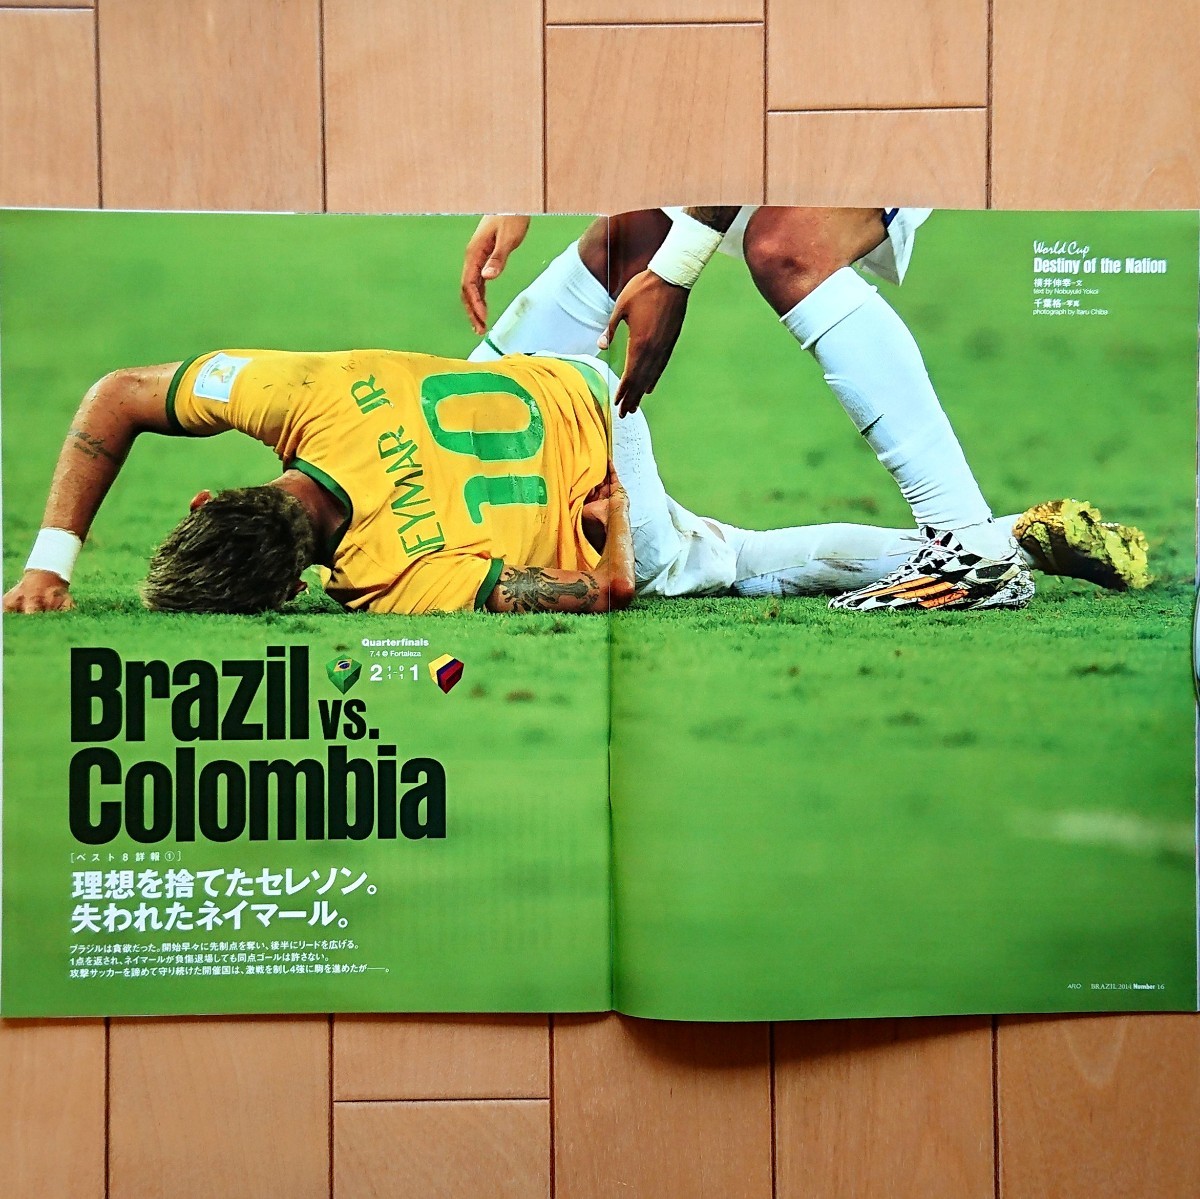 Sports Graphic Number 臨時増刊号 World Cup Brazil 2014 Special Issue ④ 8強激突 Footboal Fantas これが世界のサッカーだ。2014年7/15_画像5